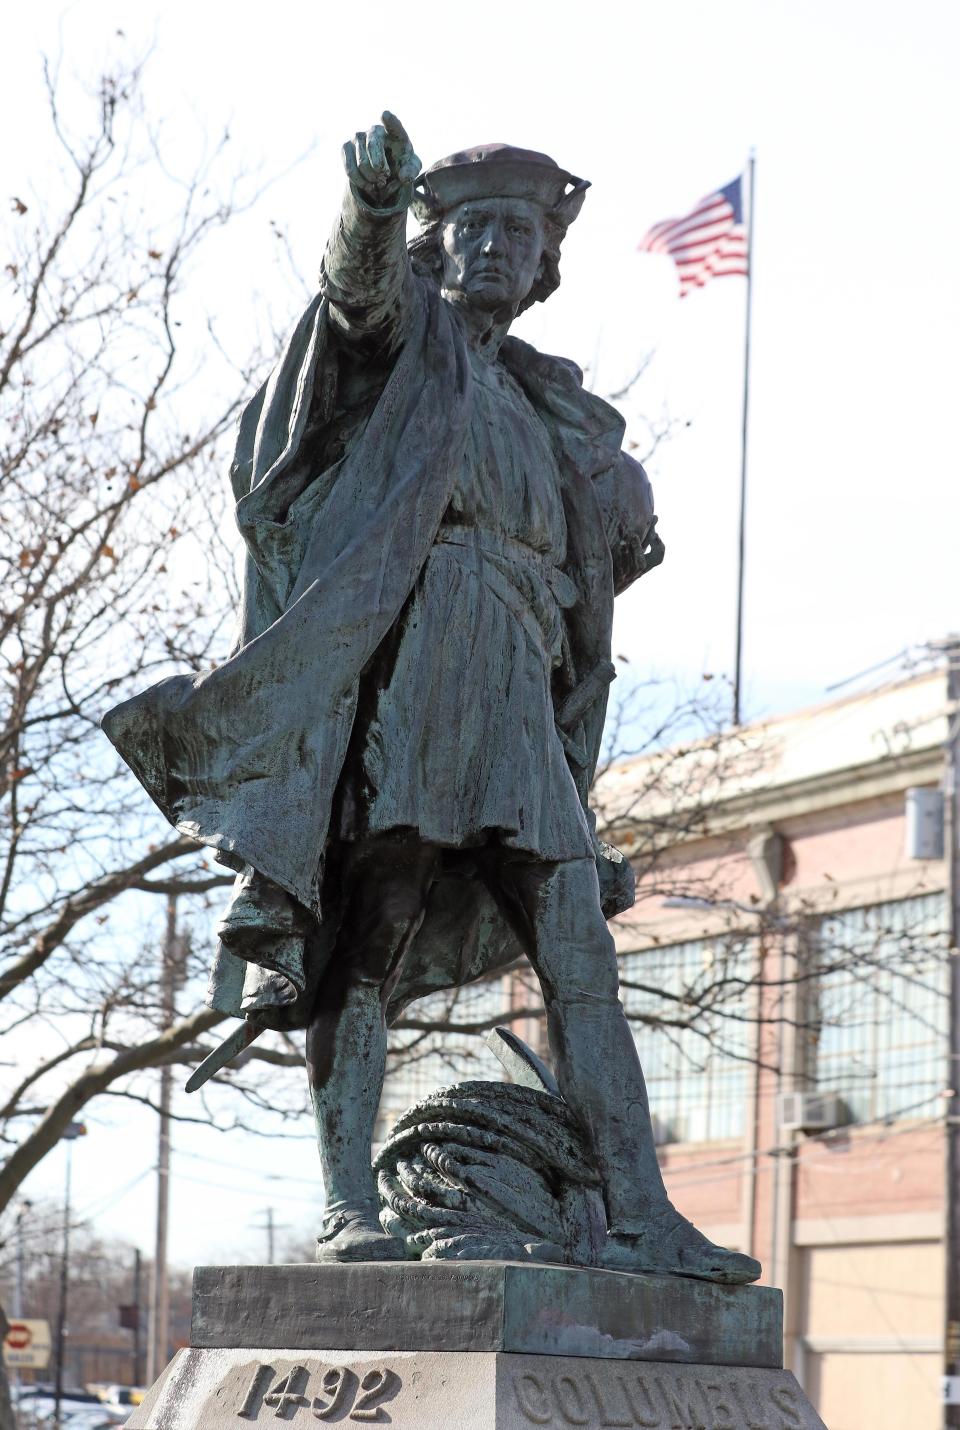 The Christopher Columbus statue when it stood at Elmwood and Reservoir avenues in Providence.